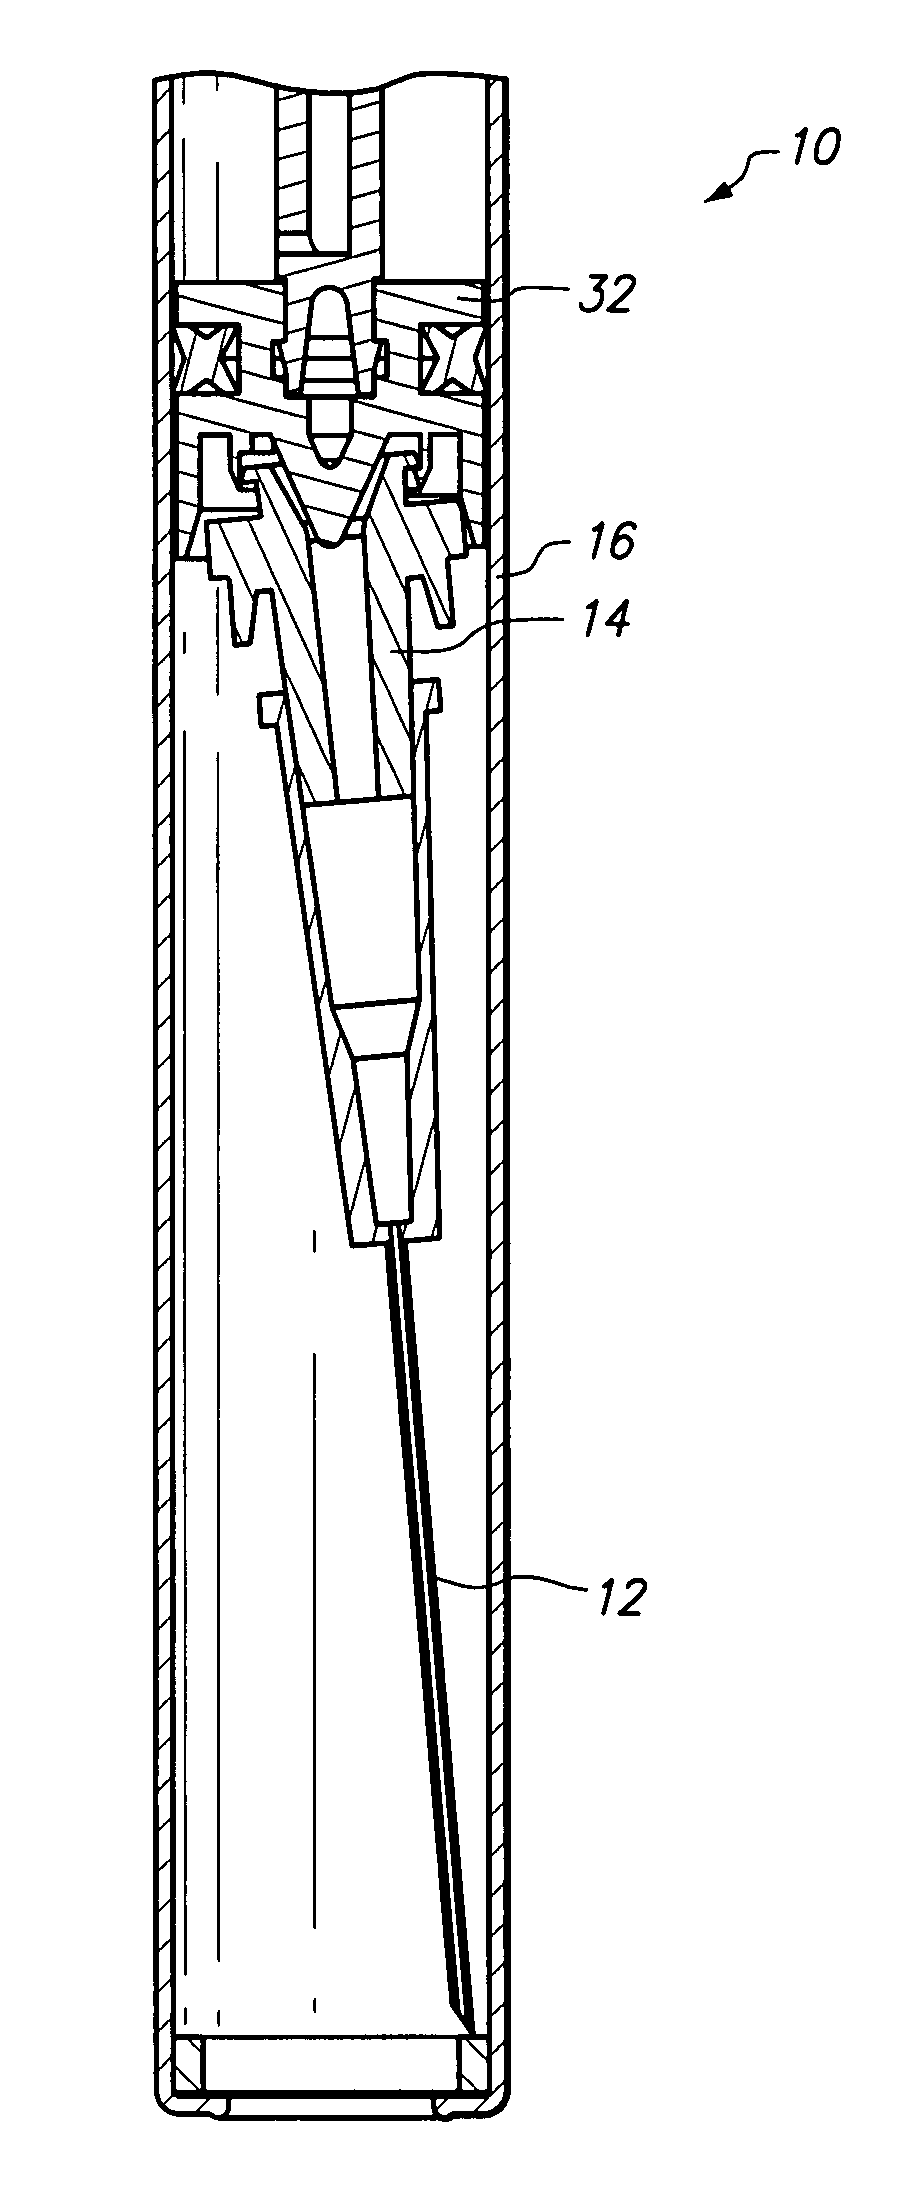 Plunger activated vacuum release mechanism for a syringe